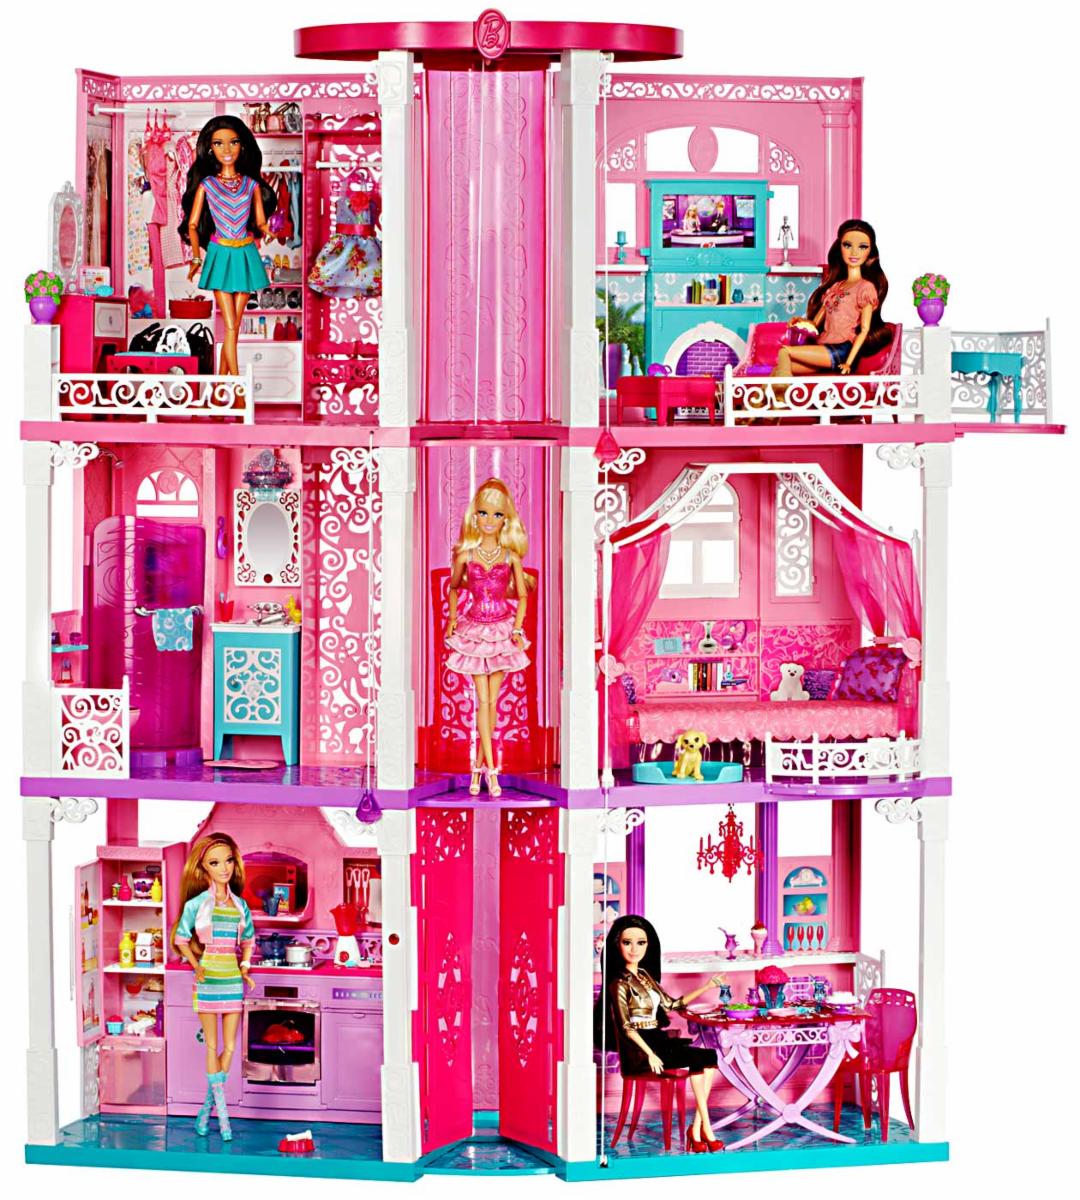 Barbie Dream House Pictures   Widescreen HD Wallpapers 1080x1200